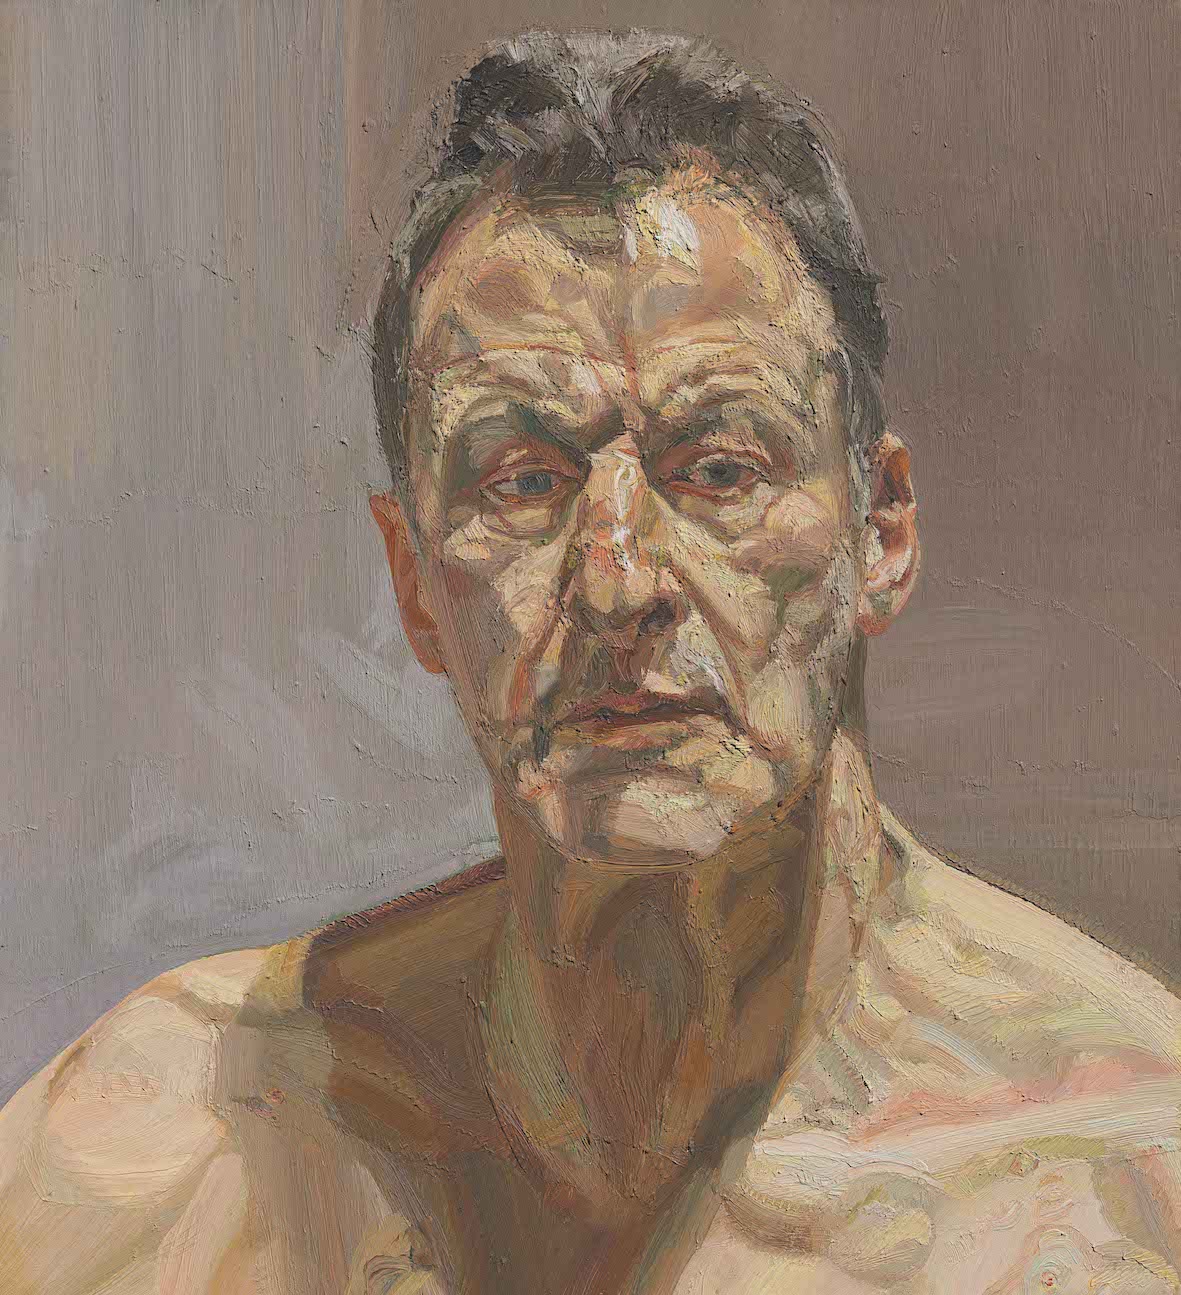 Lucian Freud, Reflection (Self-portrait), 1985. Oil on canvas, 56.2 x 51.2 cm. Private collection, on loan to the Irish Museum of Modern Art © The Lucian Freud Archive / Bridgeman Images